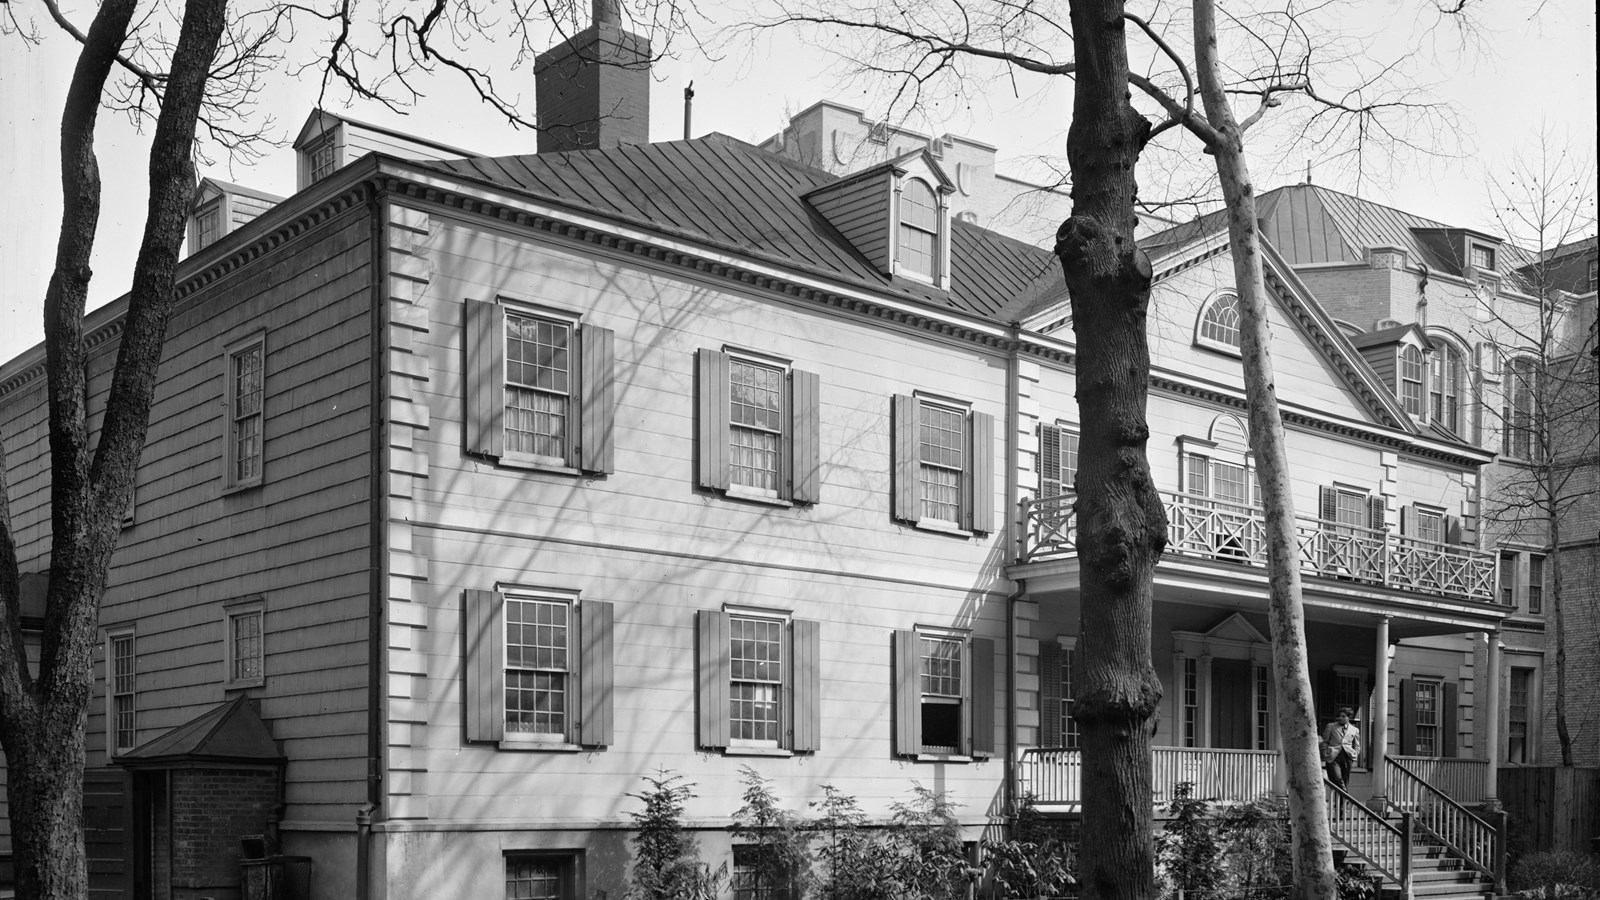 Exterior front of a two-story building with trees. Historic American Buildings Survey.